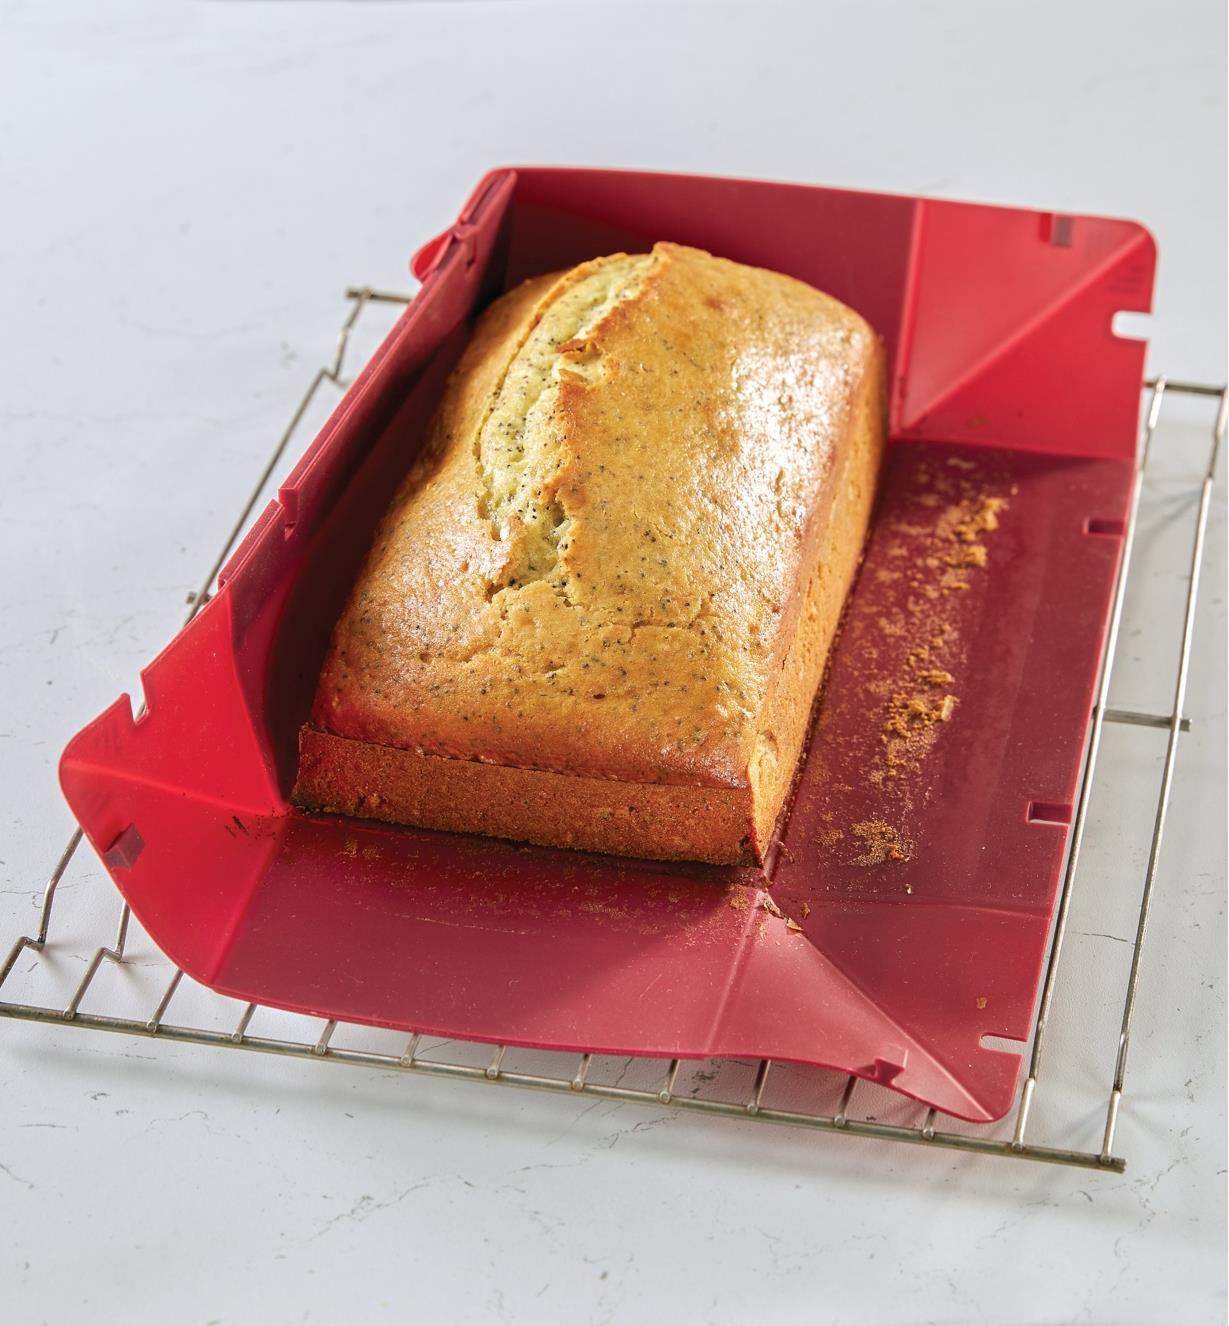 The sides of the collapsible silicone loaf pan are detached to remove a freshly baked loaf